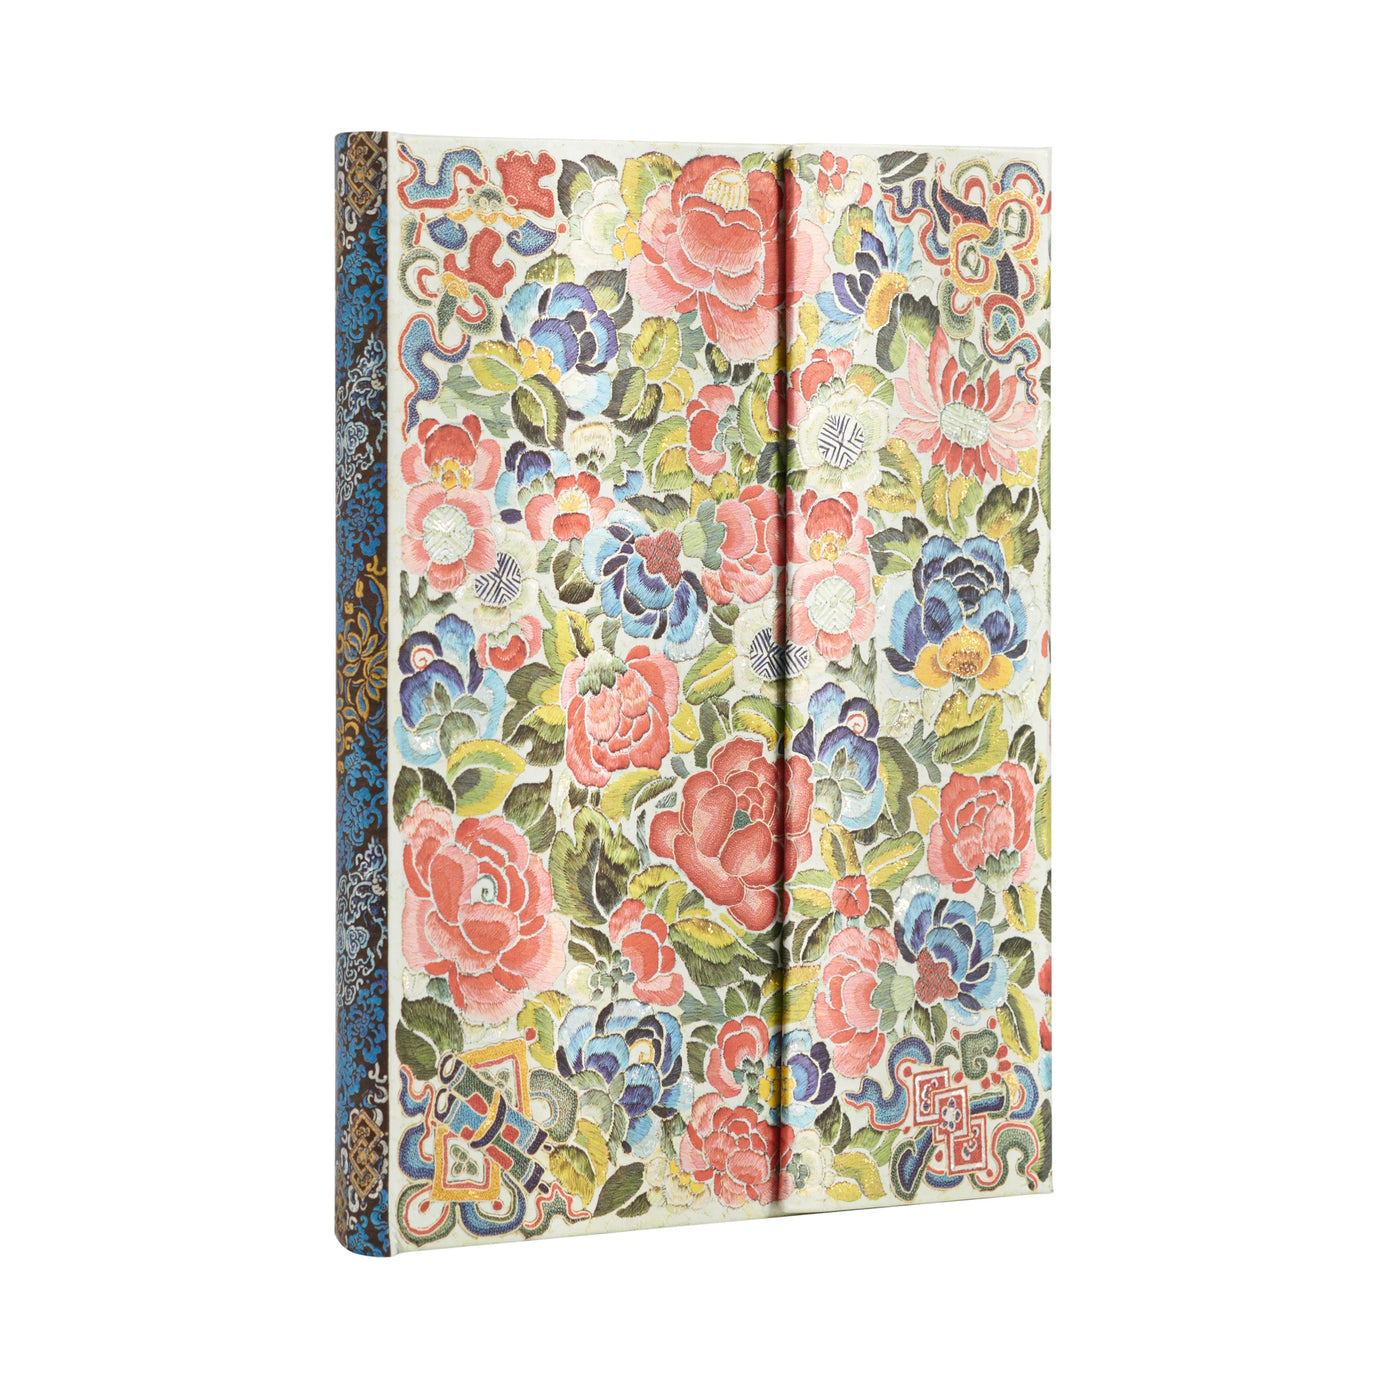 Paperblanks Pear Garden Midi 5 x 7 Inches Address Book